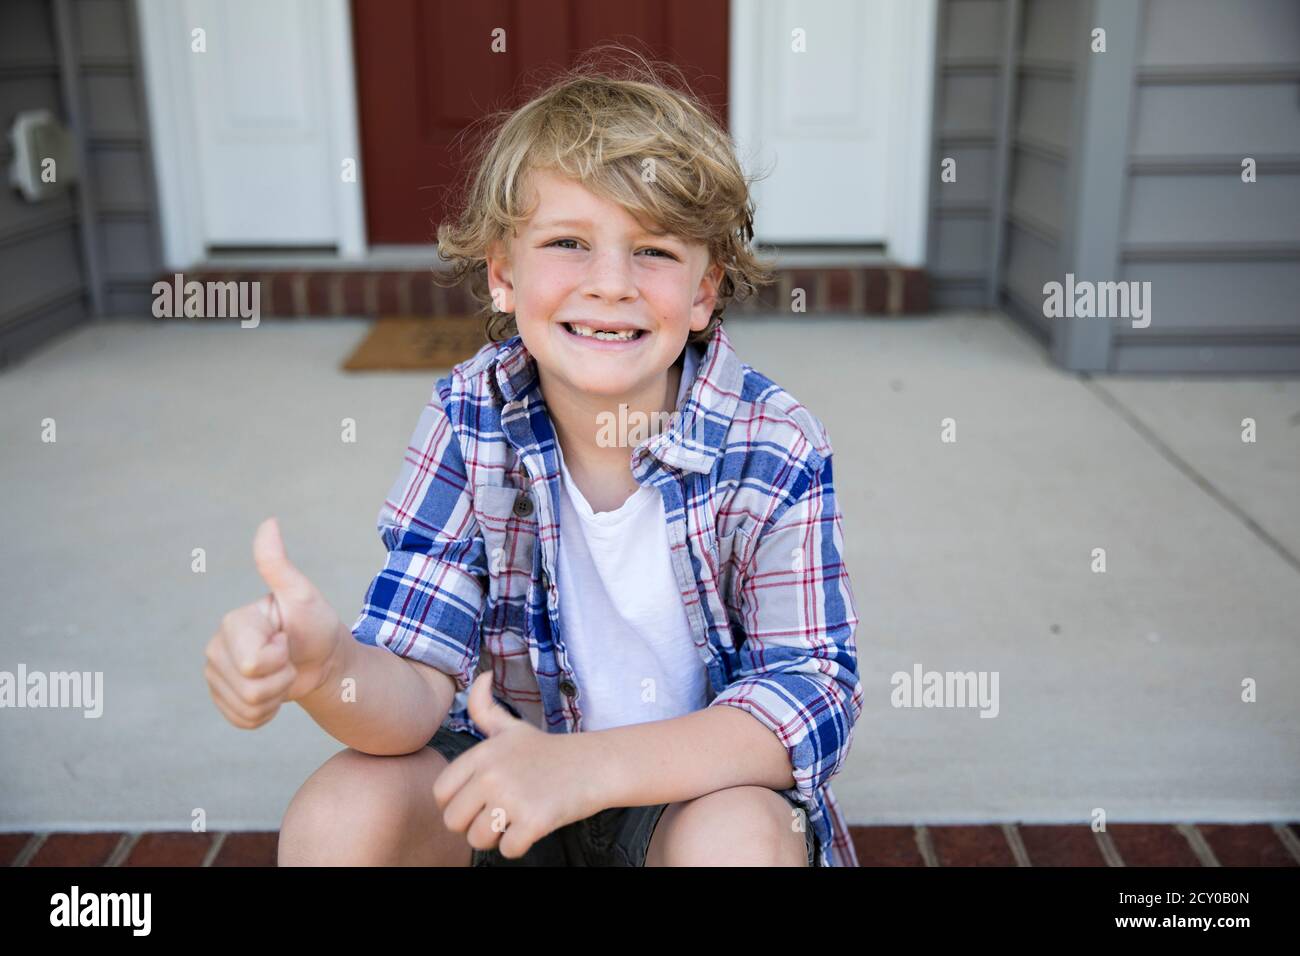 Toothless First Grade Boy Gives Thumbs Up While Sitting on Brick Steps Stock Photo